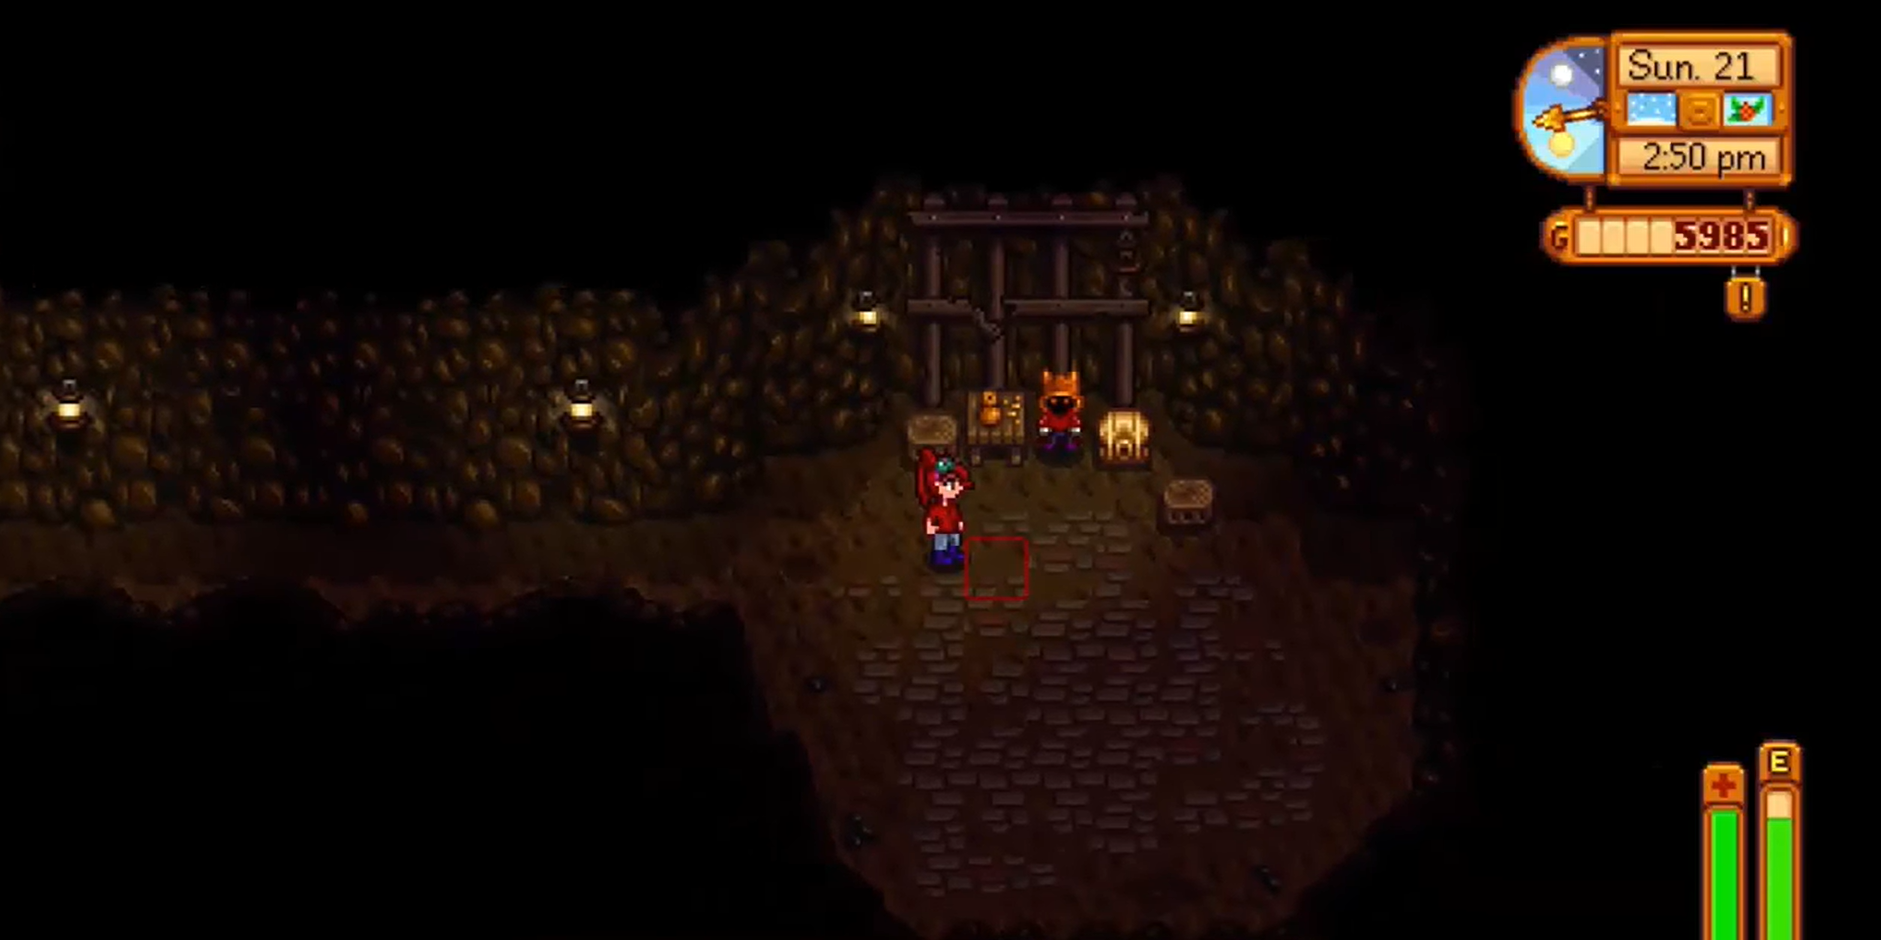 A player visits the Dwarf in the mines, to the right of the mine entrance